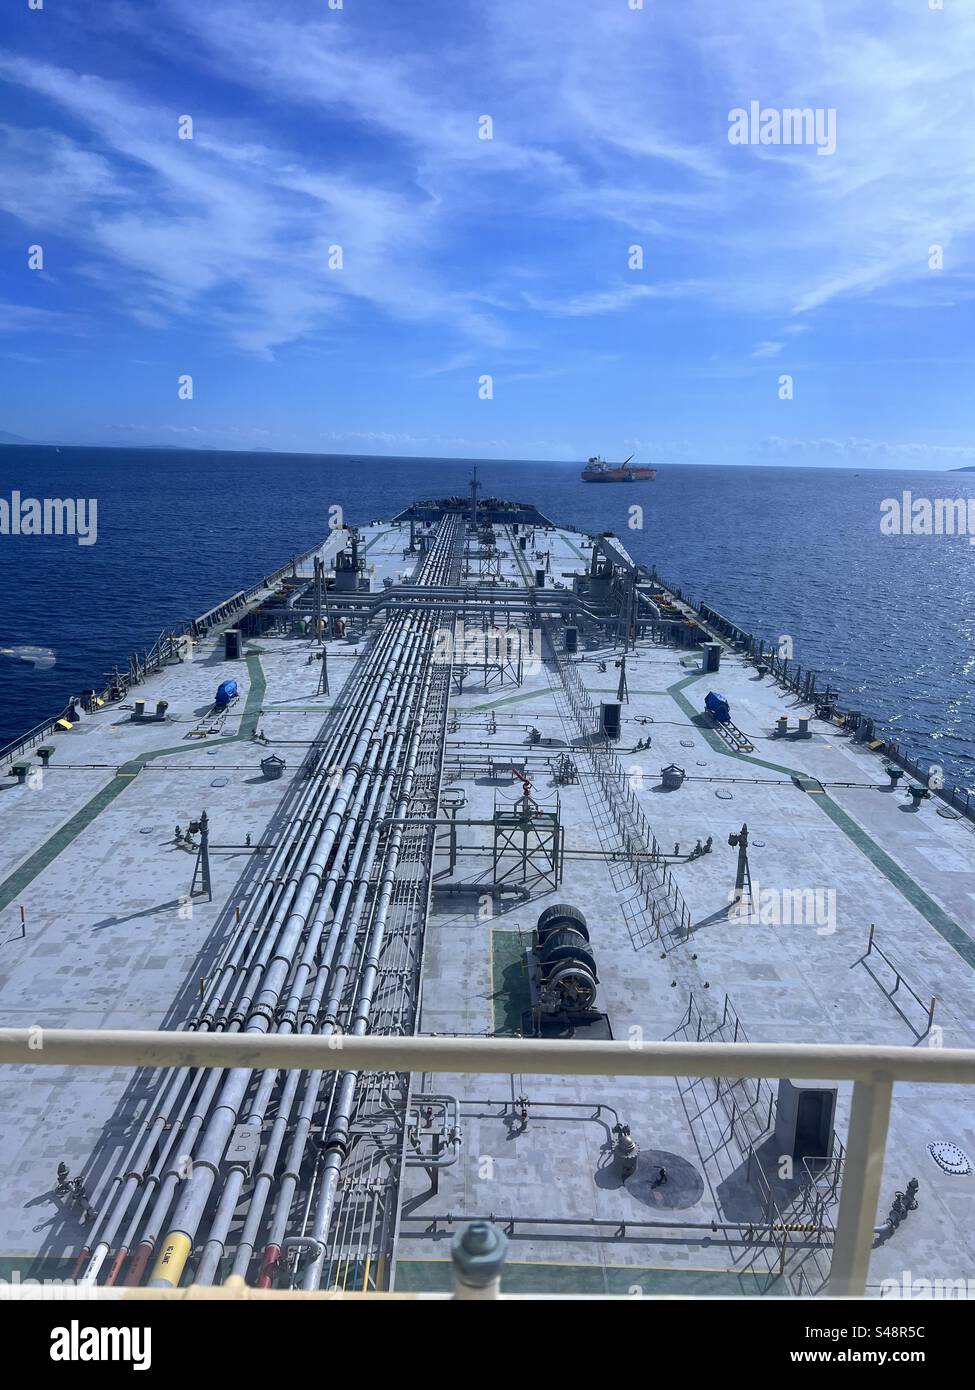 Tanker vessel, view from the bridge of the ship. Stock Photo